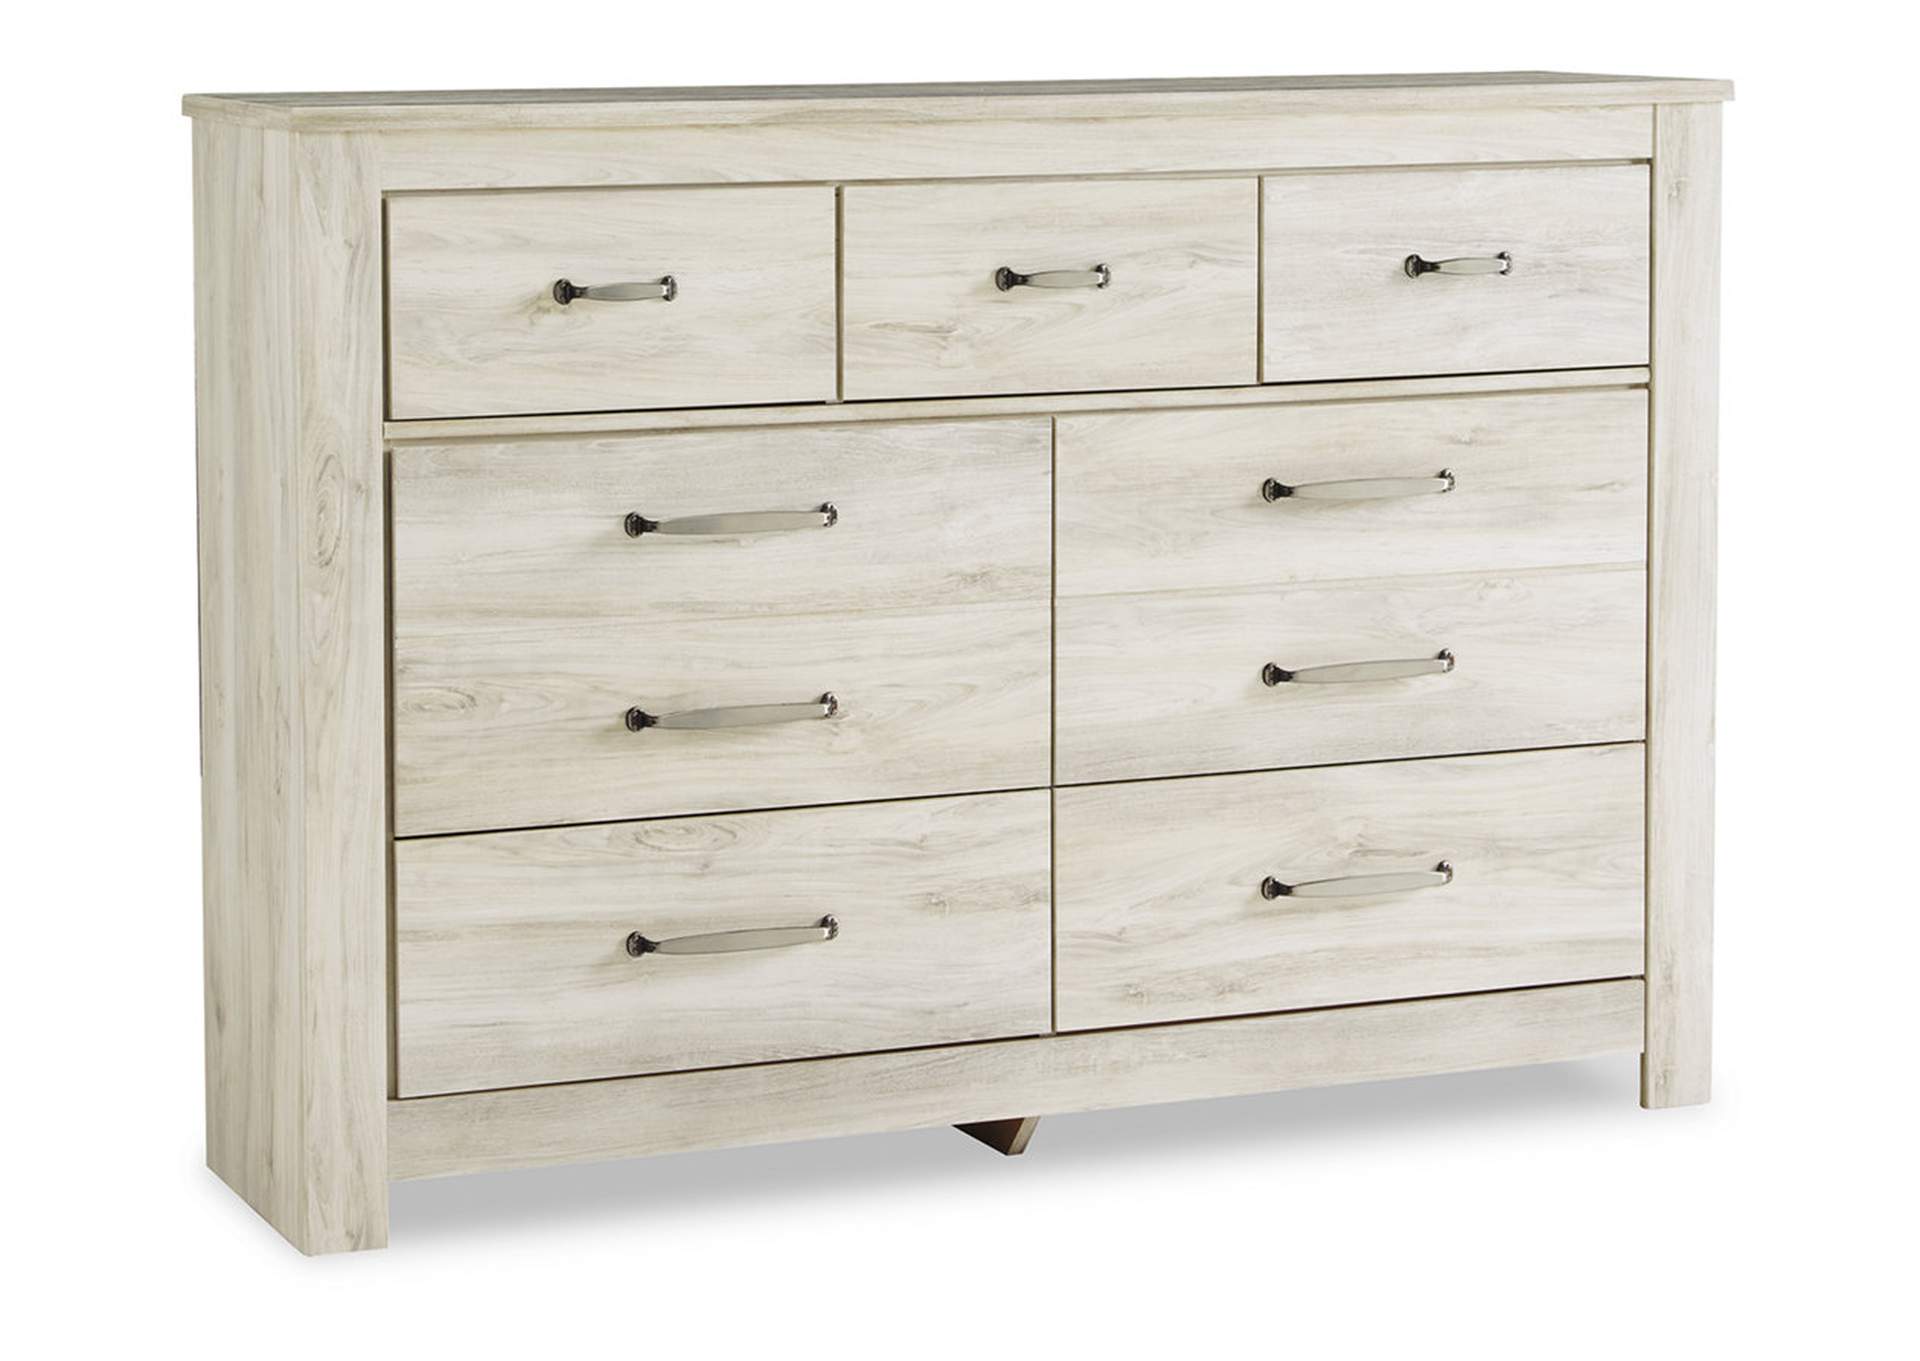 Bellaby Queen Crossbuck Panel Bed, Dresser, Mirror and 2 Nightstands,Signature Design By Ashley